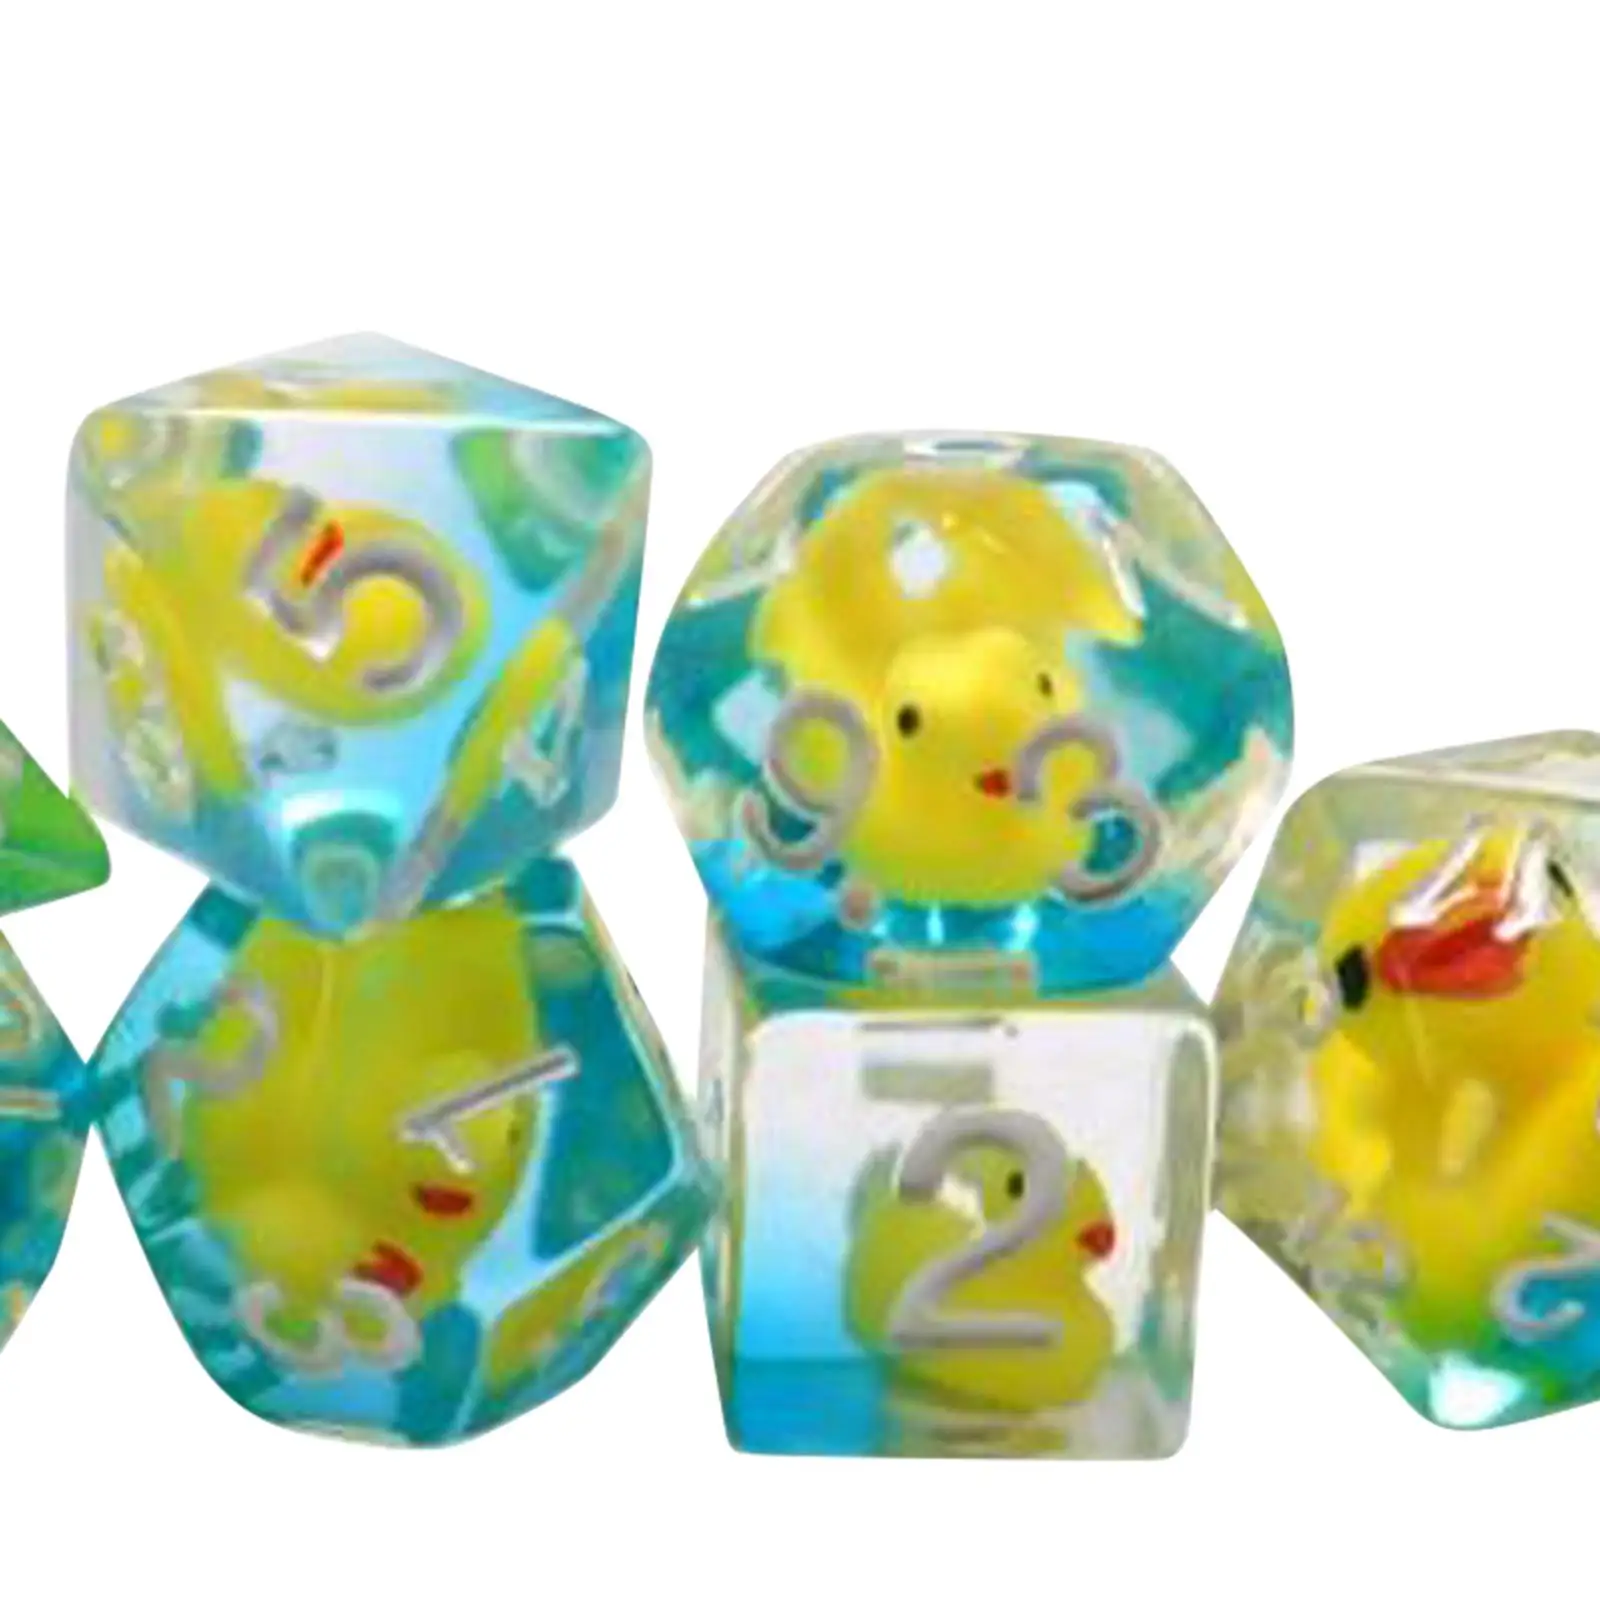 7x Polyhedral Dices Party Supplies Filled with Ducks Animal D4-d20 Game Dices Resin Dices for Bar Party KTV Card Game Card Games